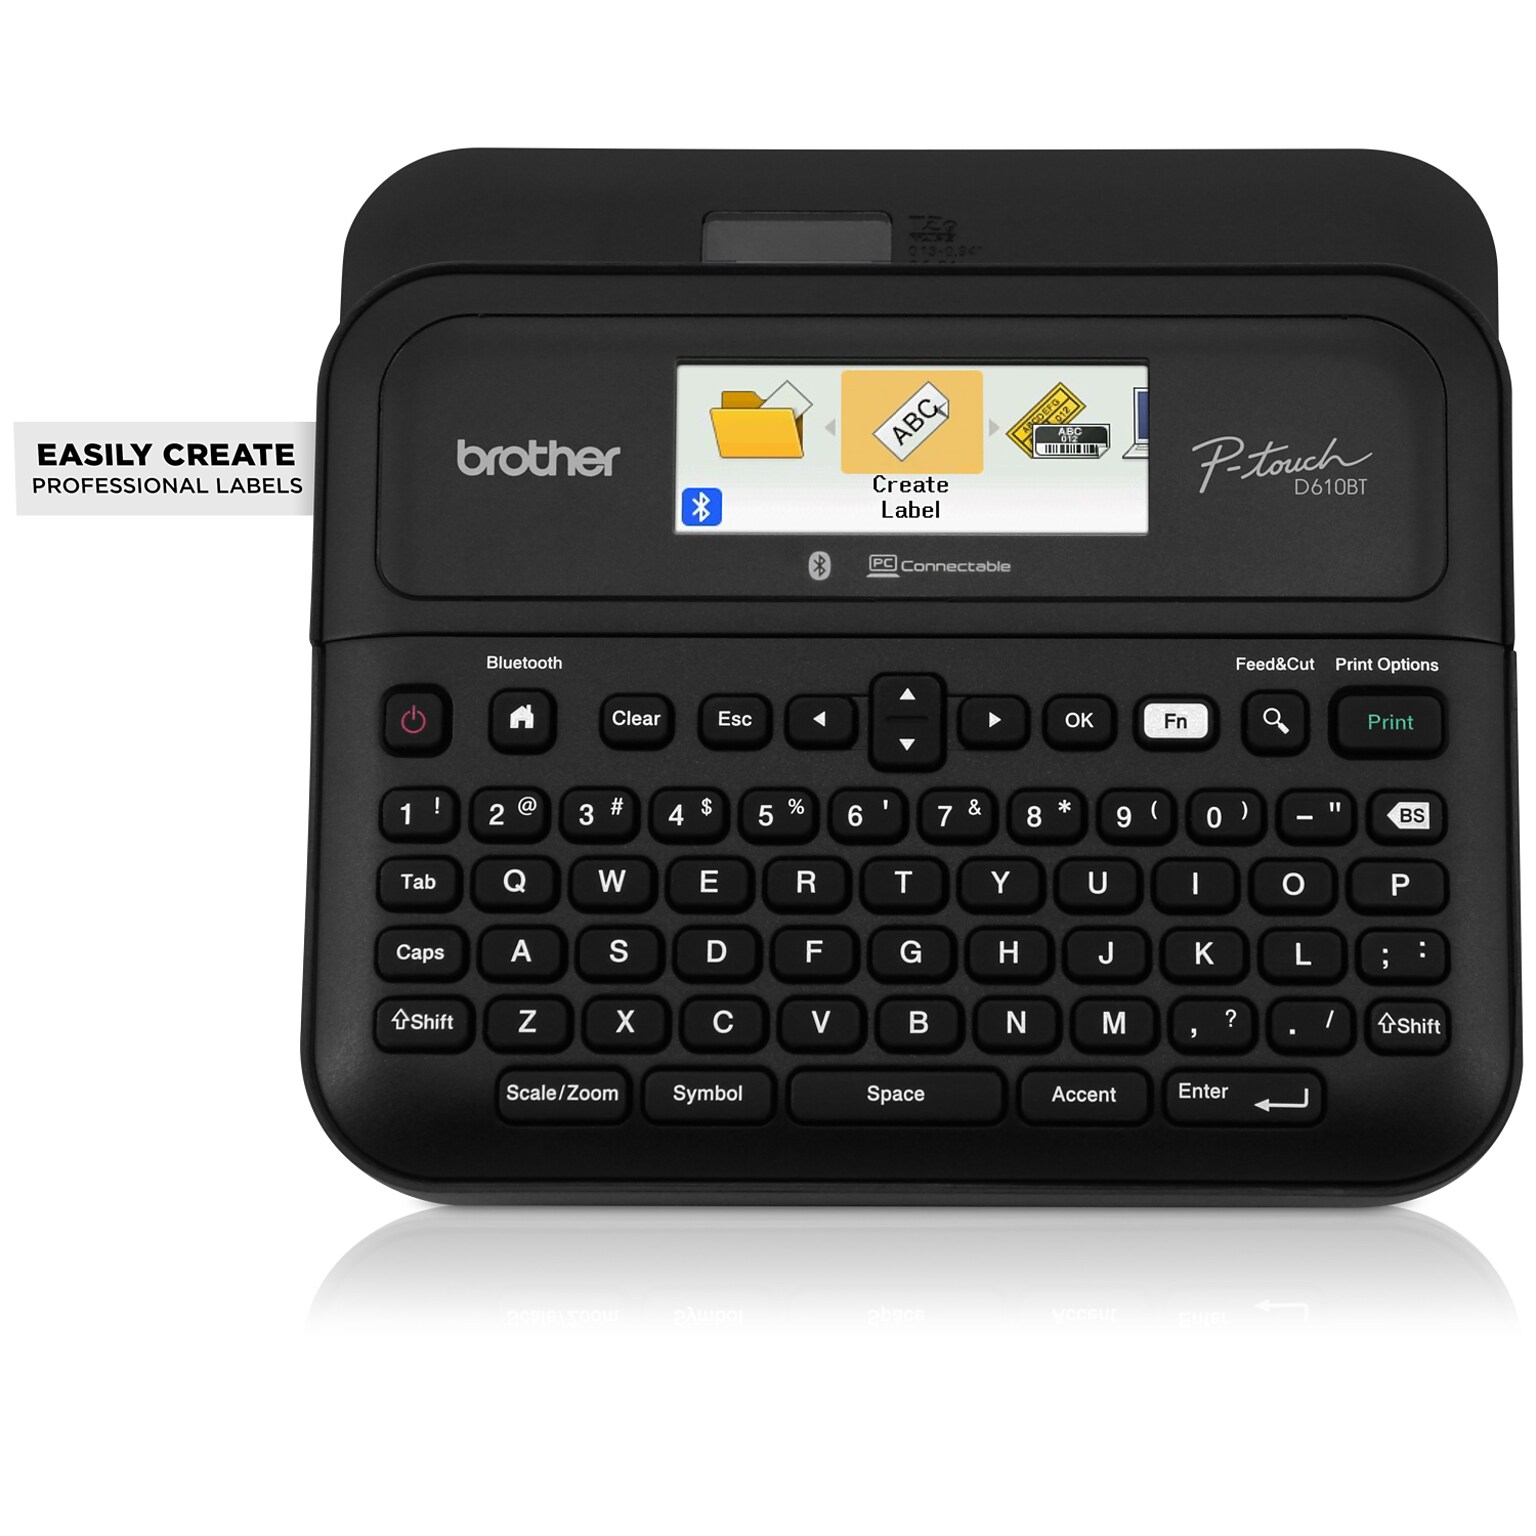 Brother P-touch Desktop Non-Thermal Label Maker with Bluetooth, Black (PT-D610BT)